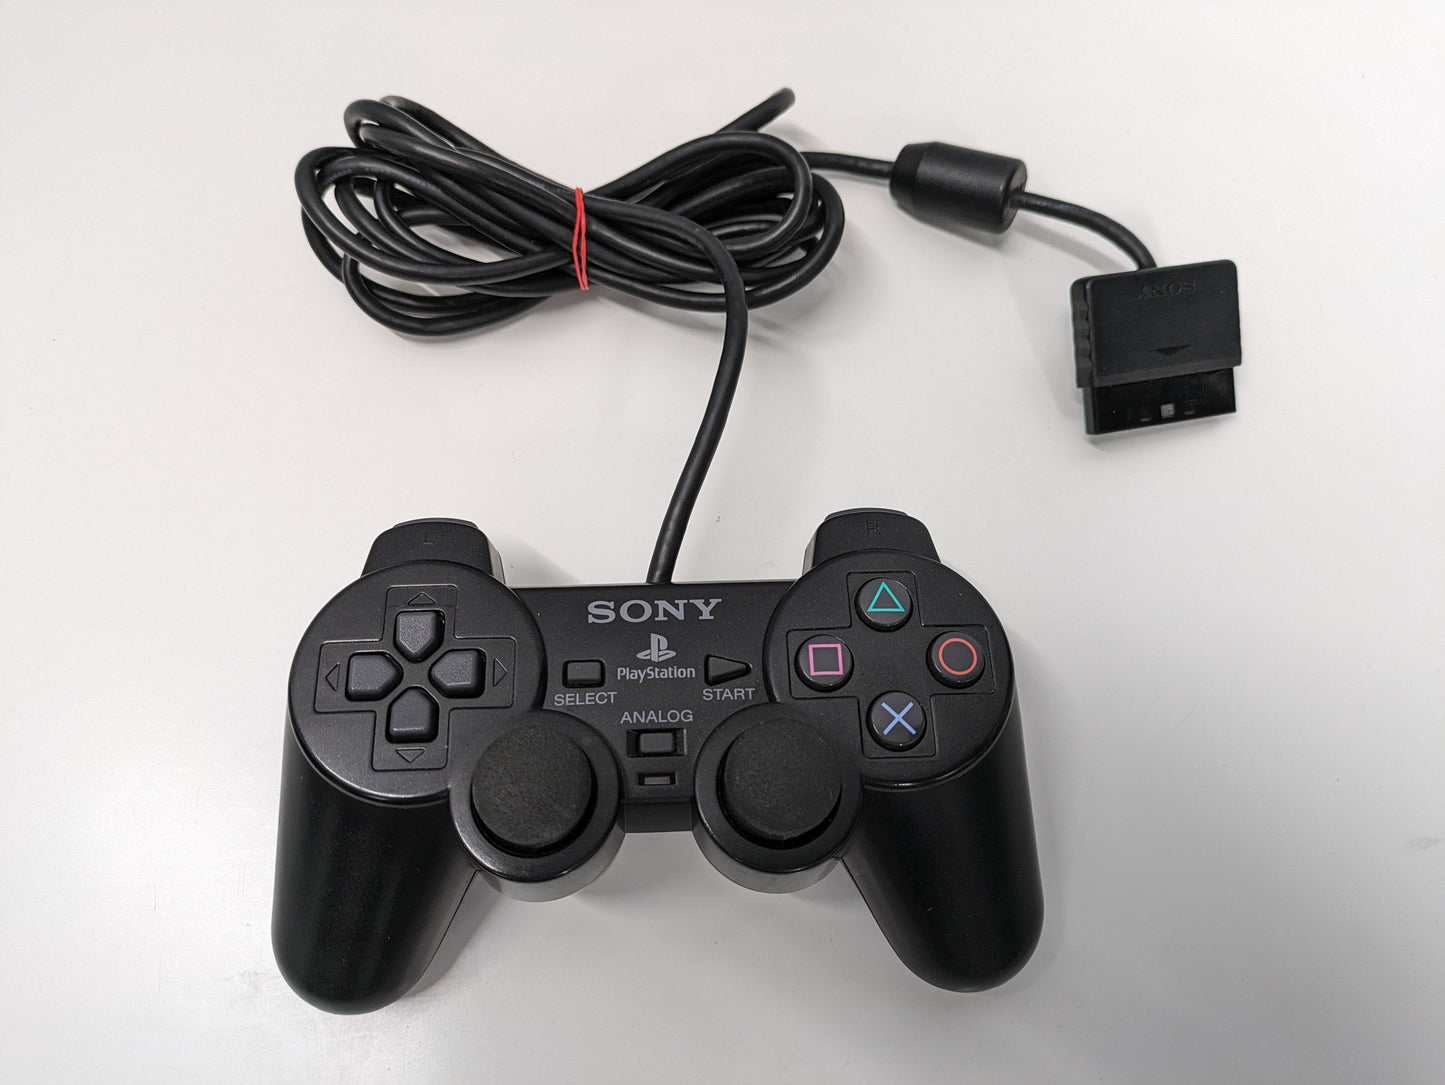 Sony PlayStation 2 PS2 Online Combo Pack w/ Controller & Cords - USED (CIB) (GG22)